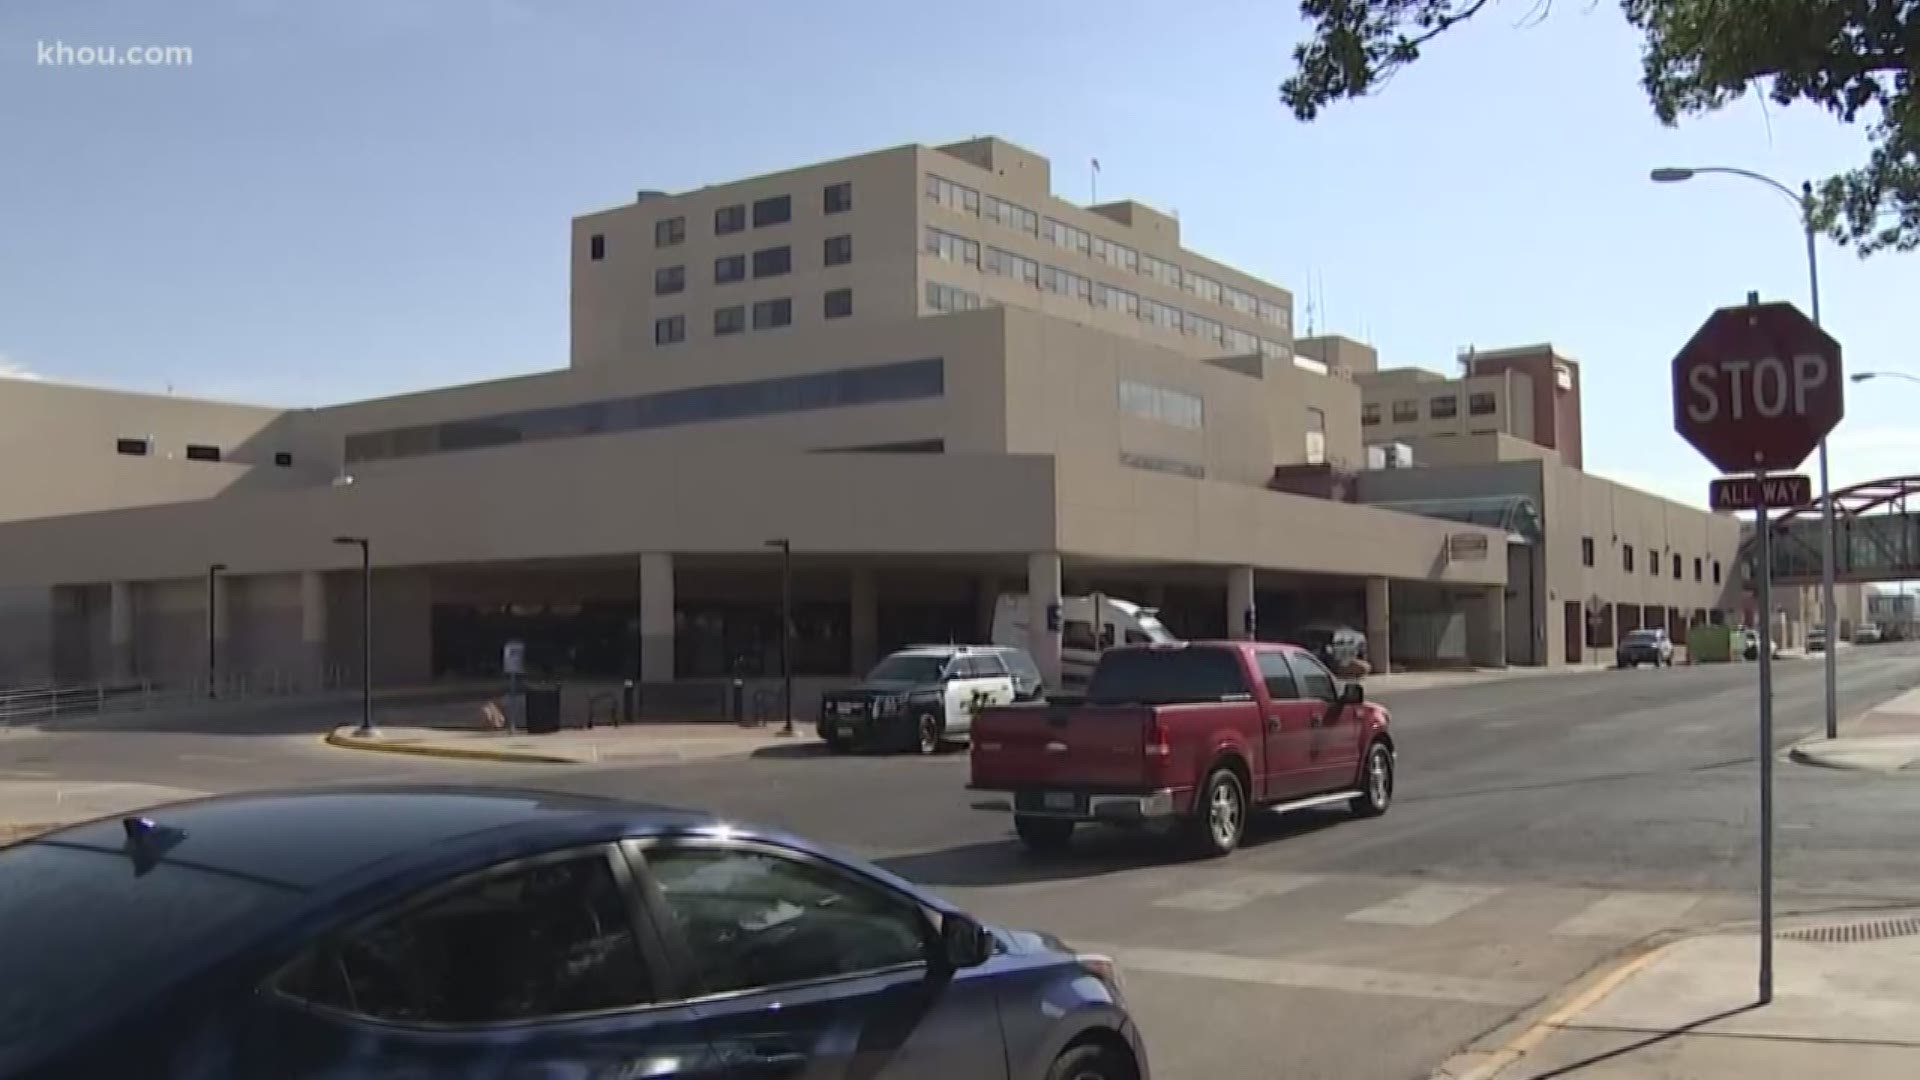 The tragic events in West Texas tested how hospitals in smaller communities like Midland and Odessa would react to a mass shooting situation.